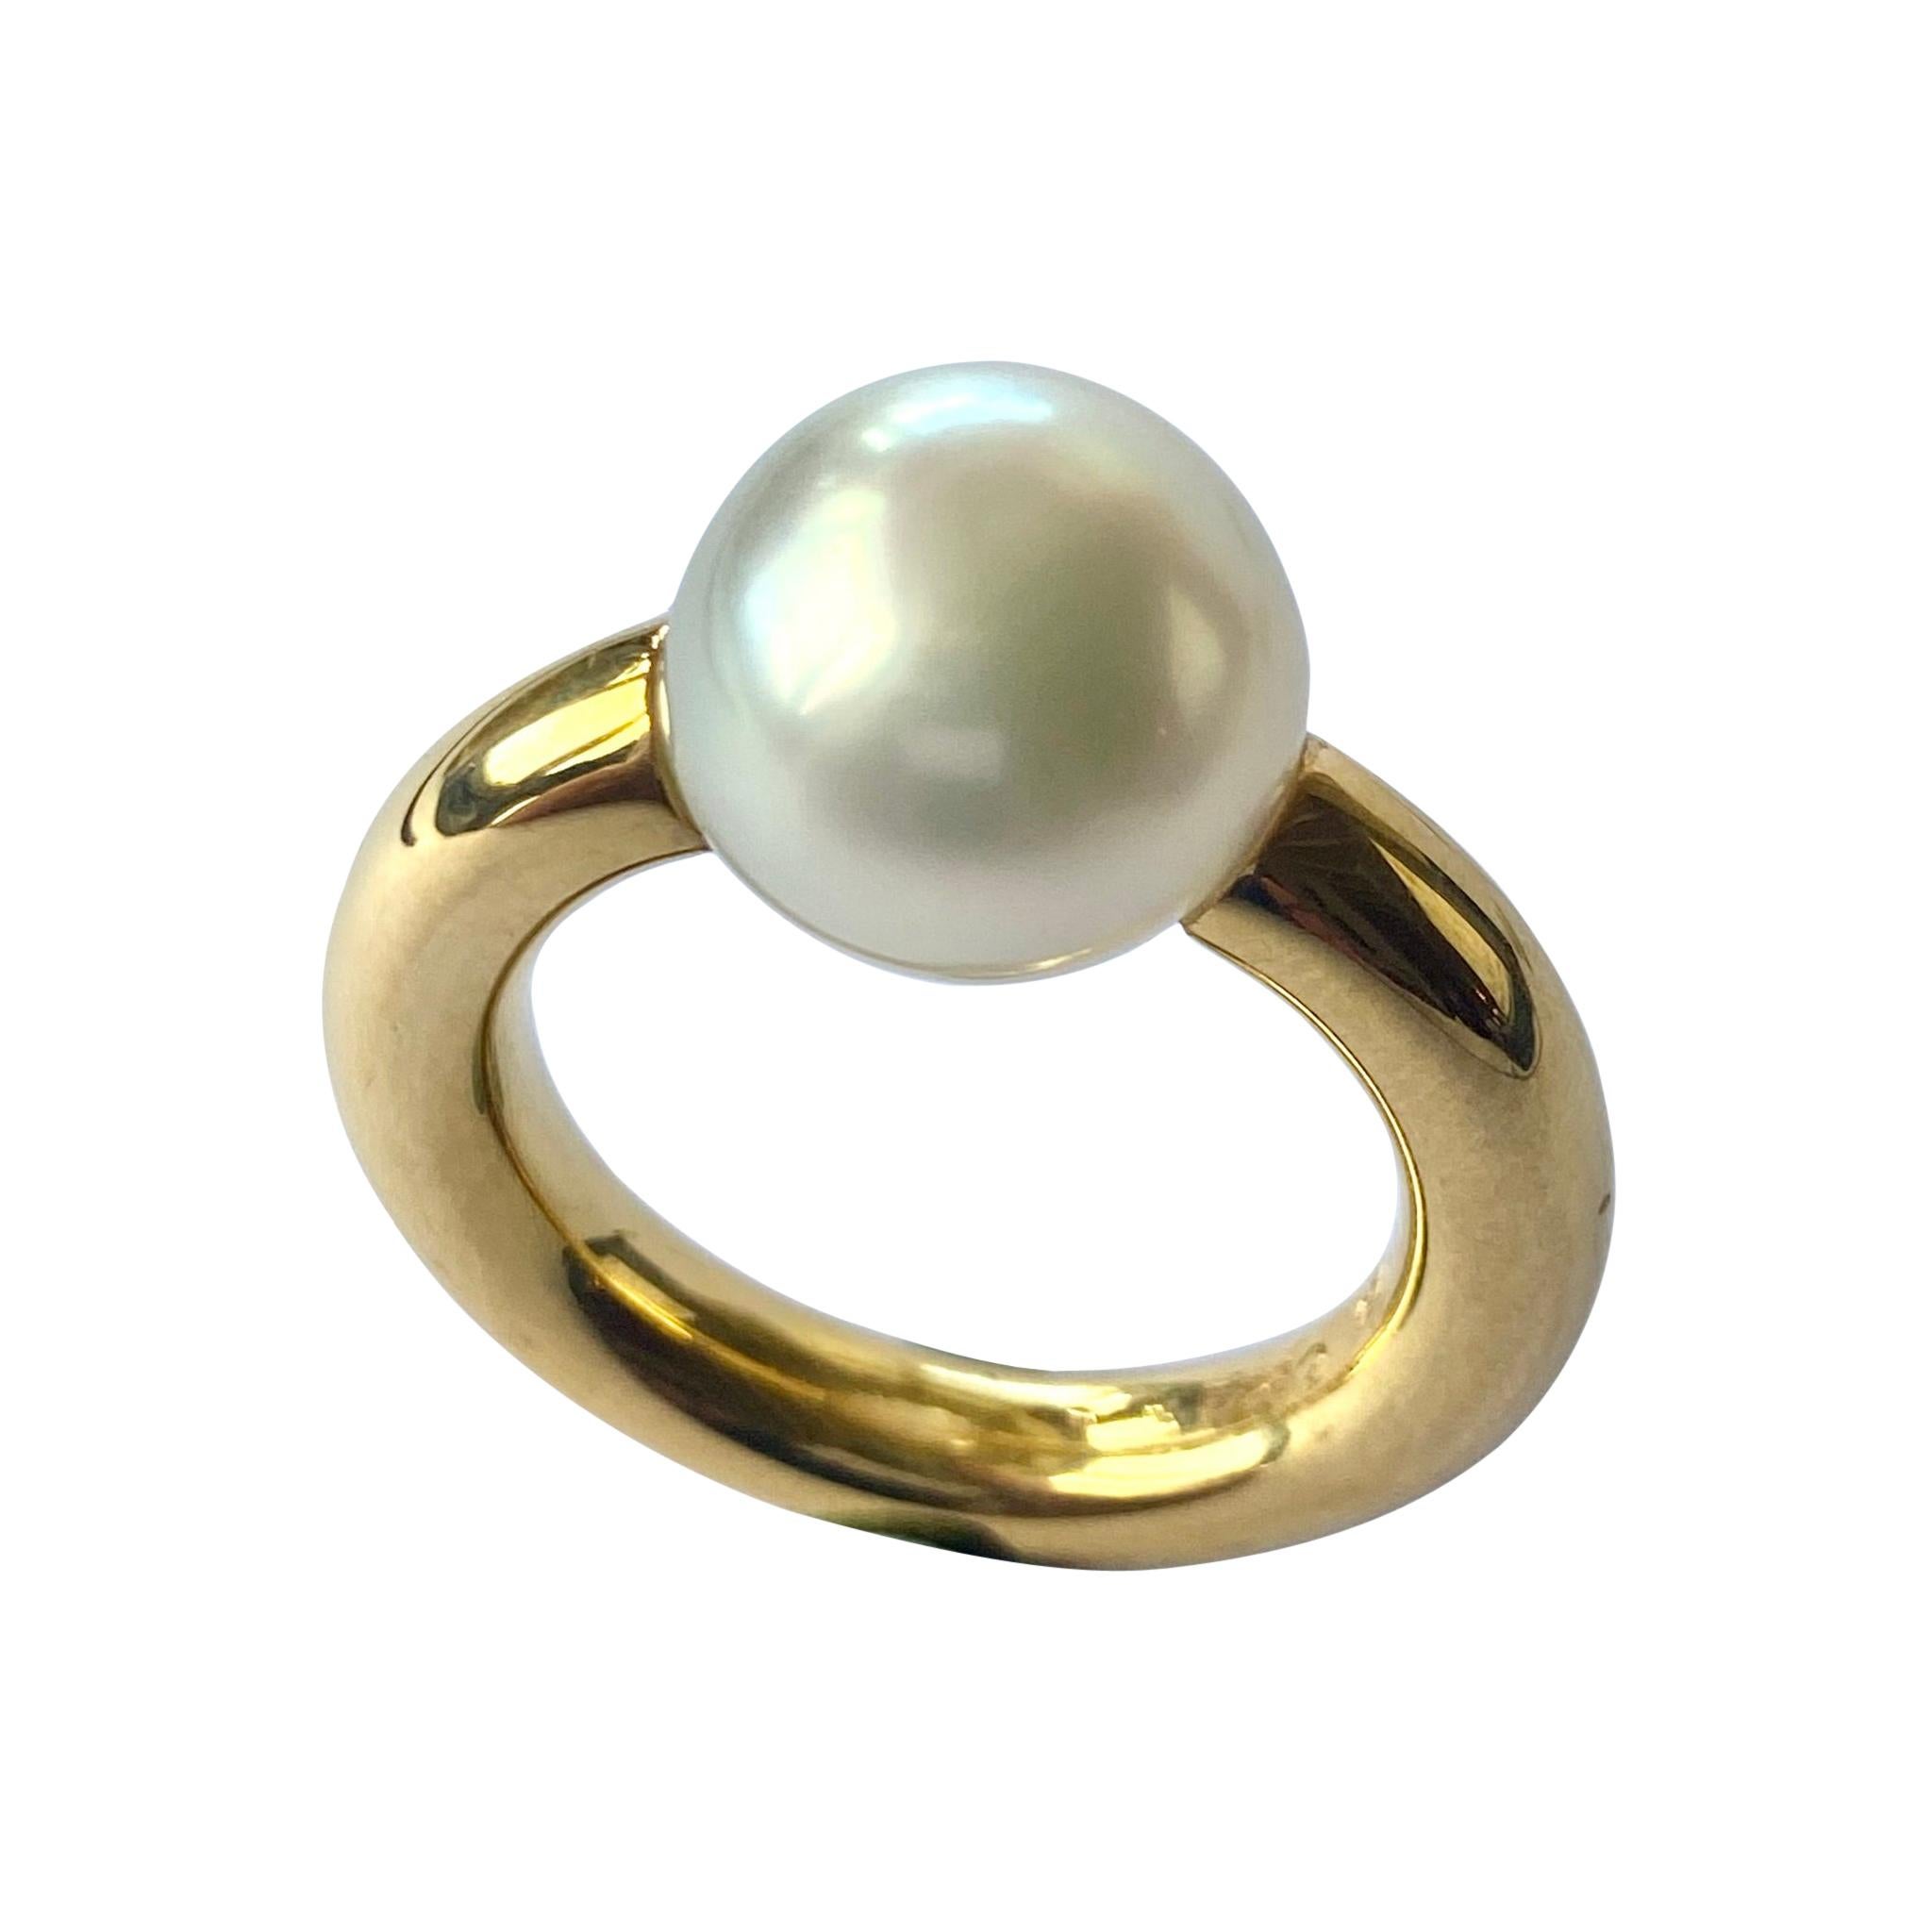 South See Pearl in a 18K, Yellow Gold Ring Signed Schoeffel Germany